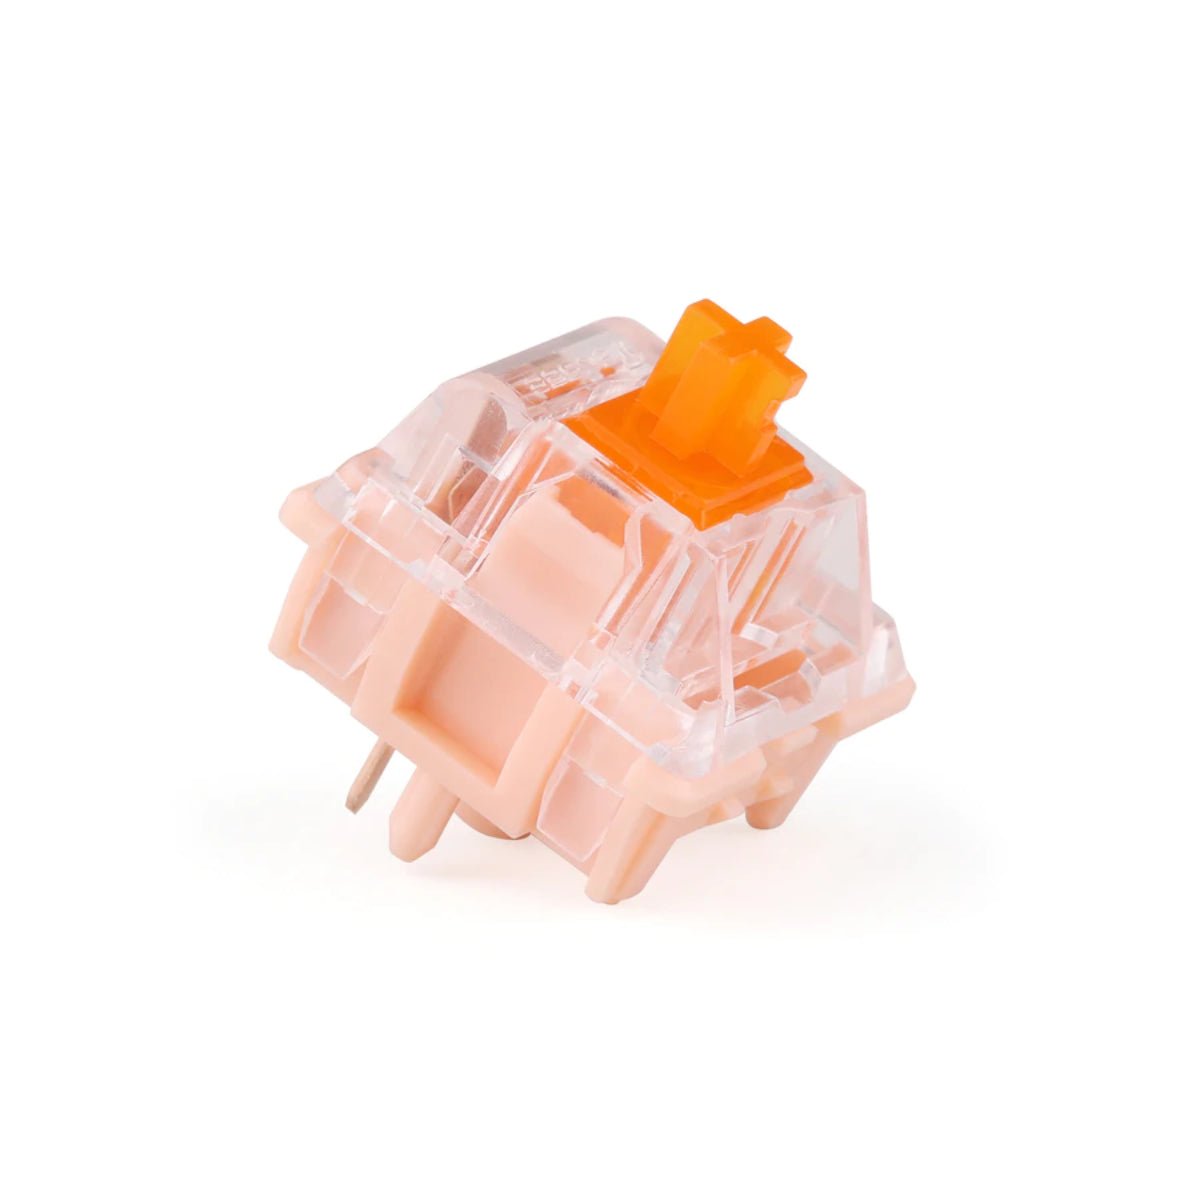 KBD Fans Tecsee Tactile Switches - Coral - Store 974 | ستور ٩٧٤